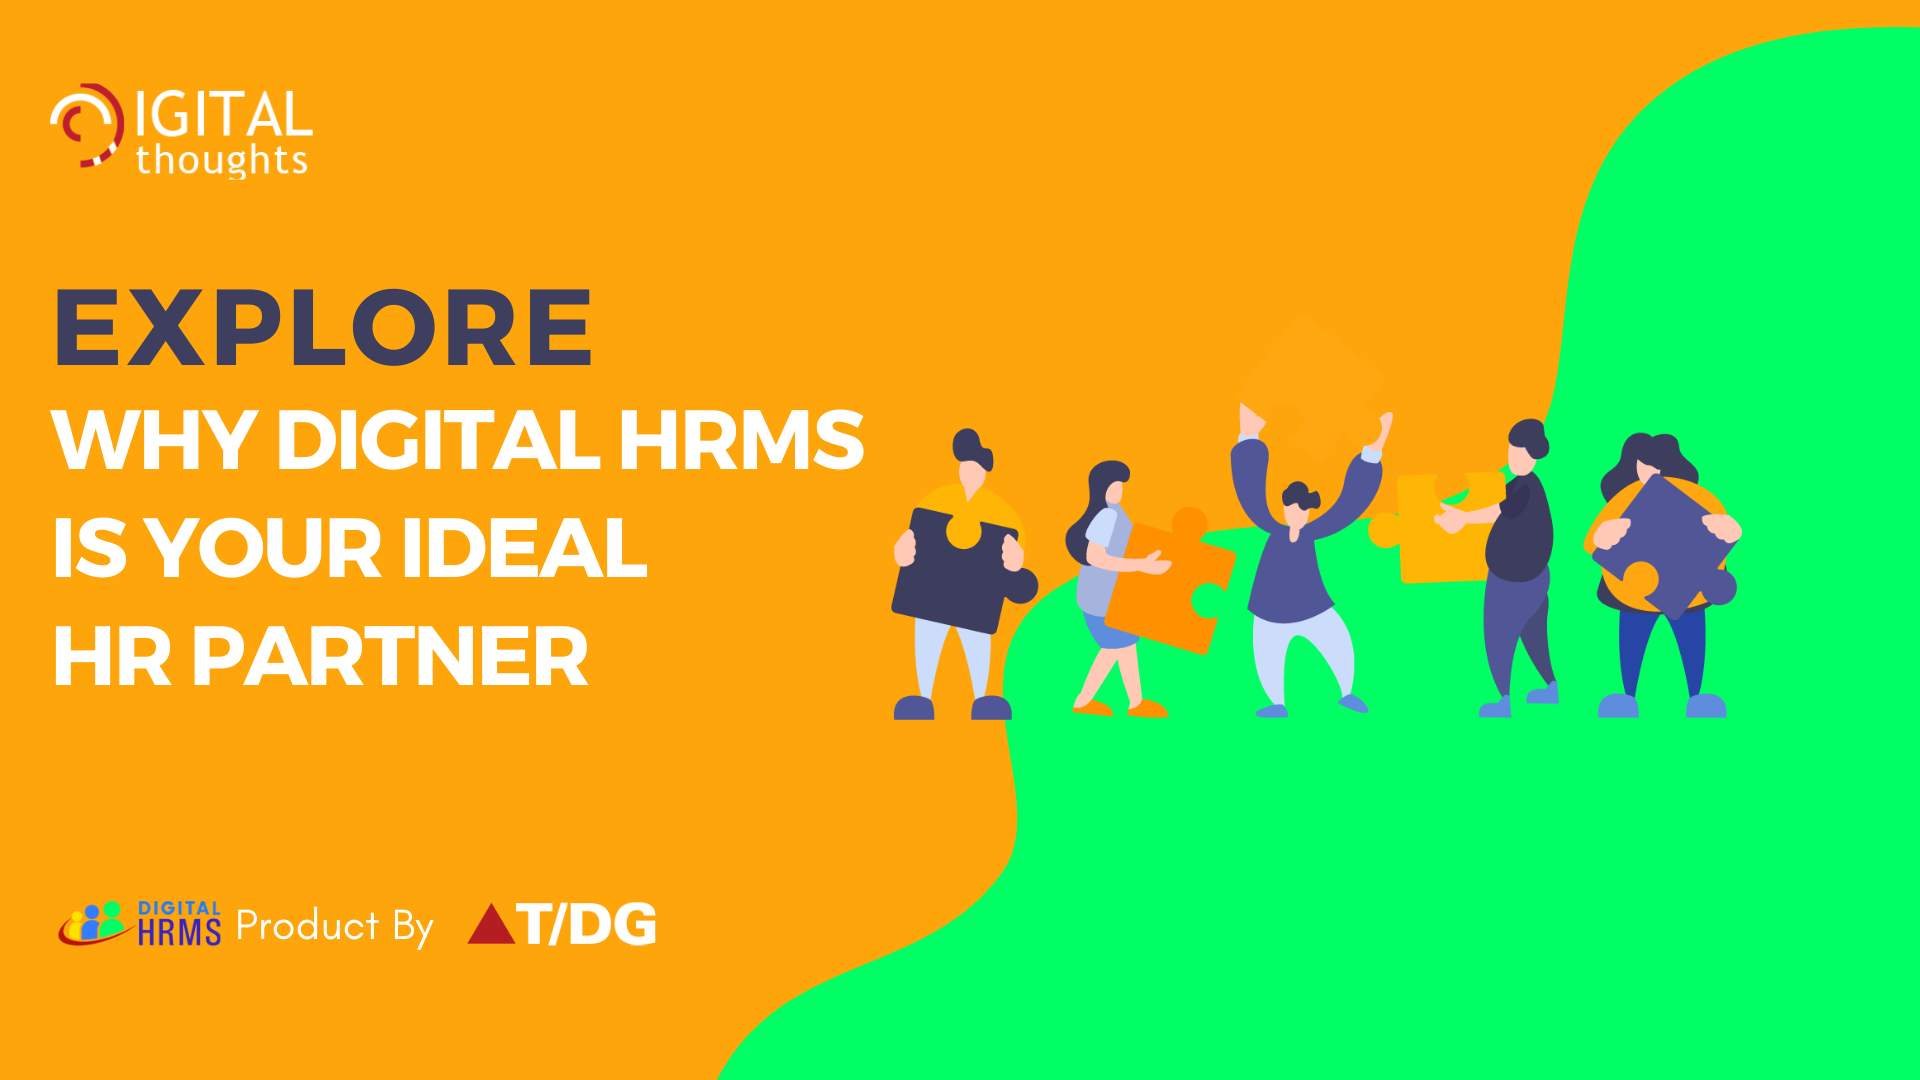 5 Reasons that Make Digital HRMS Your Ideal HR Partner